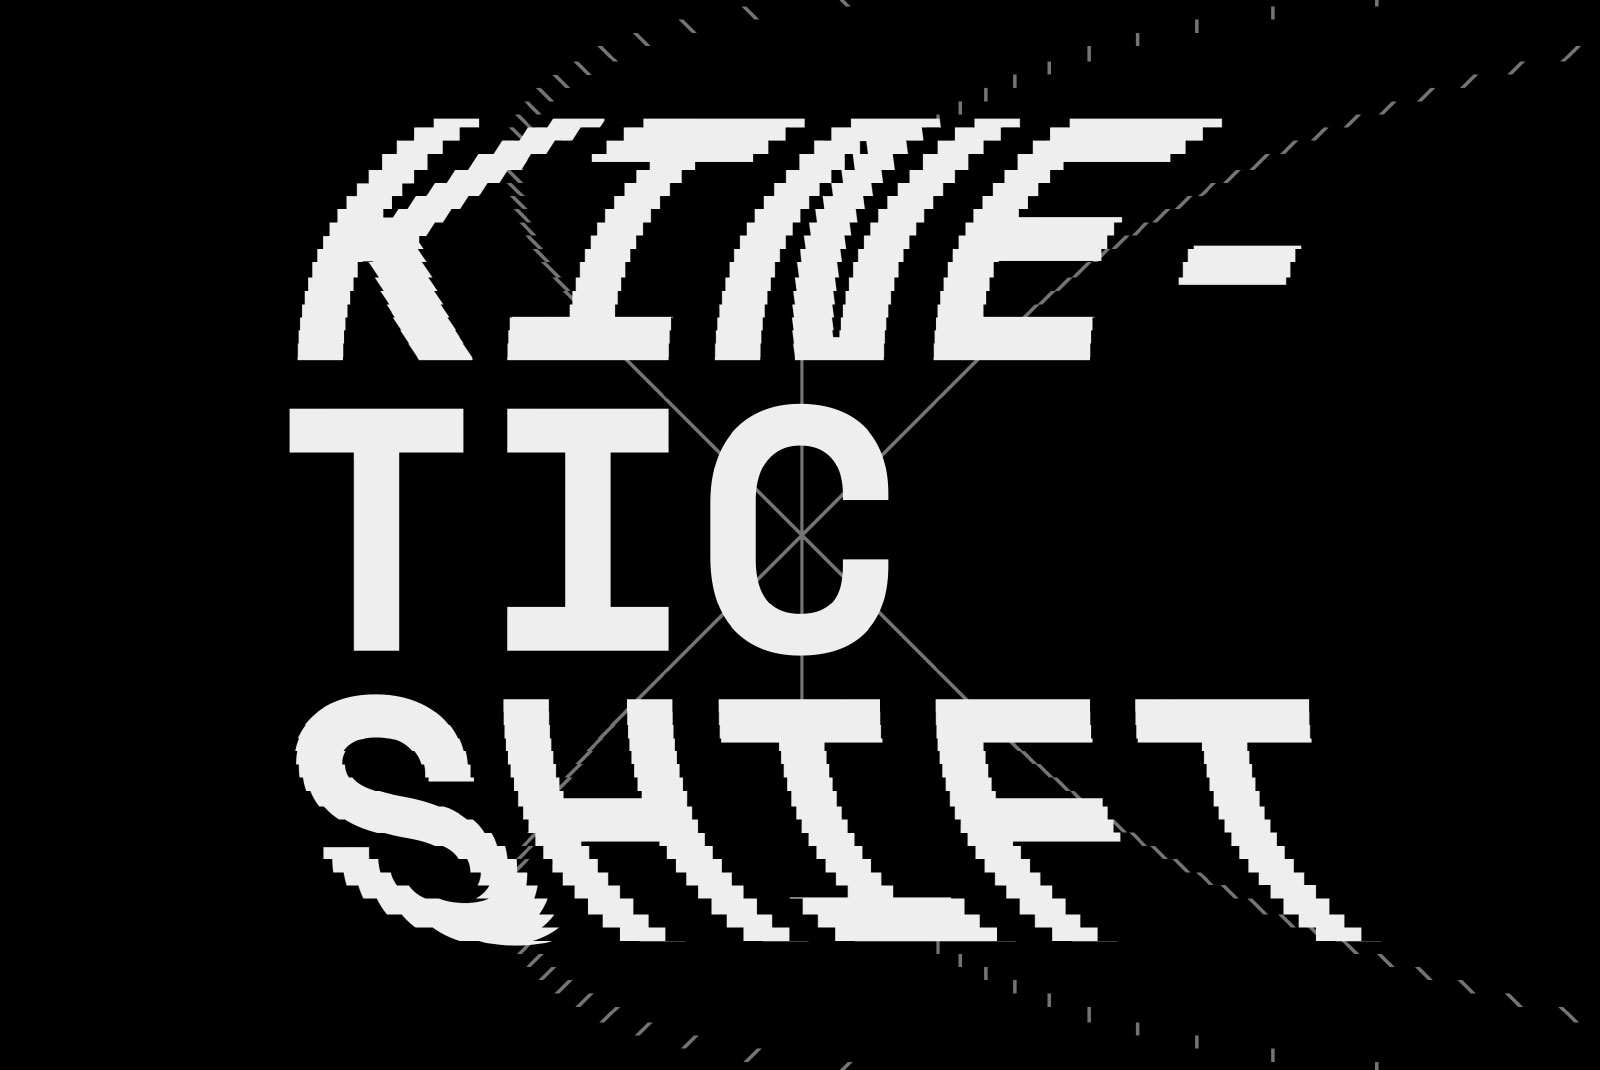 Dynamic black and white typographic design, modern distorted text effect, "Kinetic Shift" phrase, suitable for graphic templates.